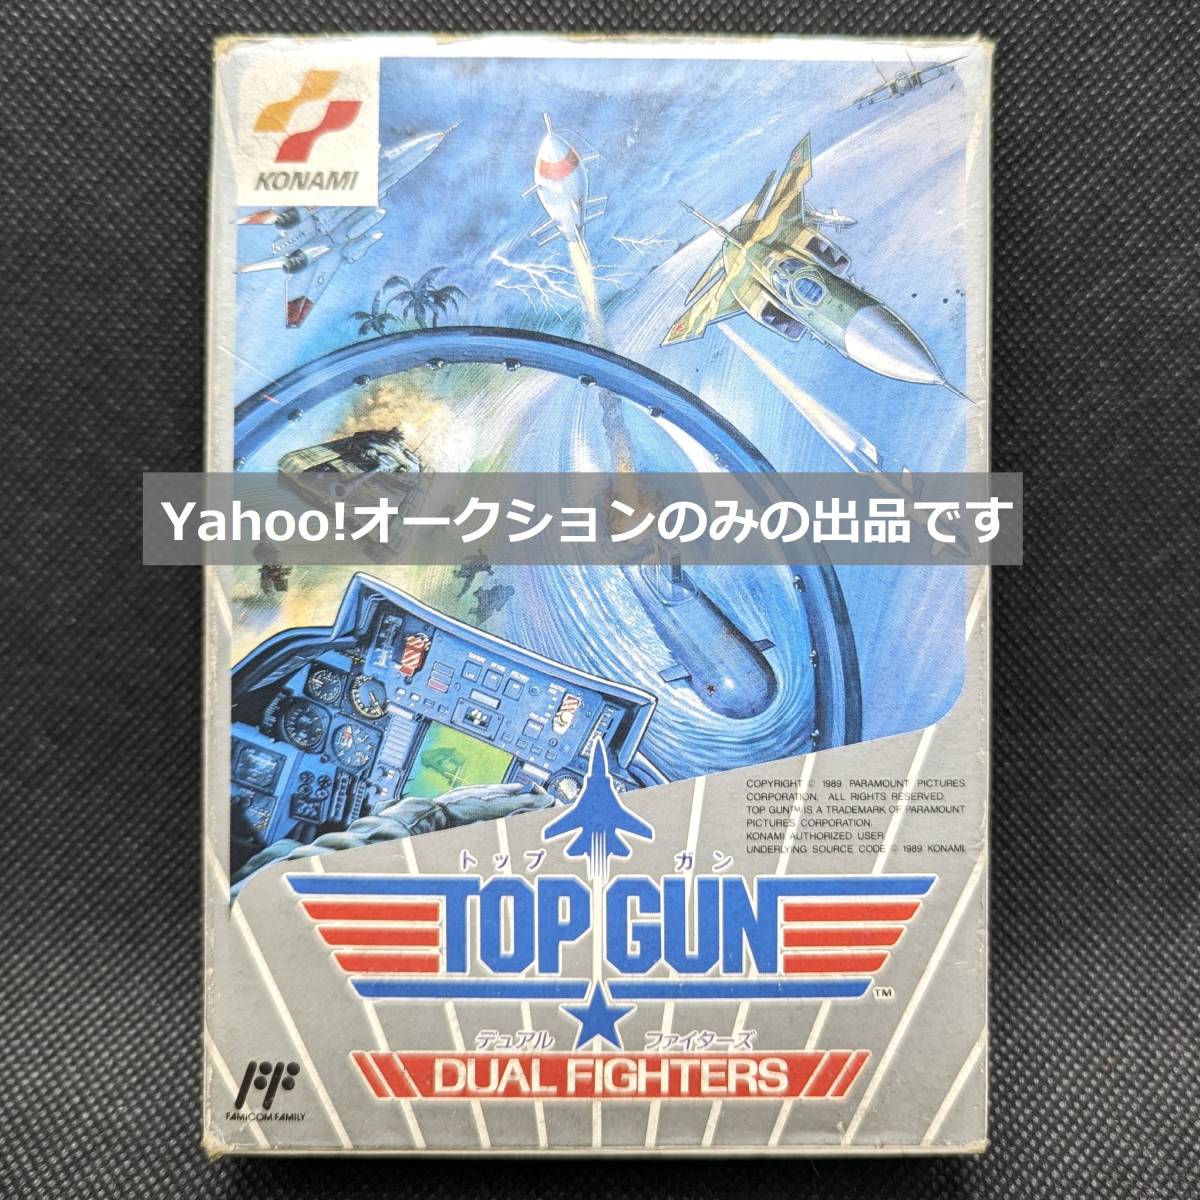 FC* top gun dual Fighter zTOP GUN DUAL FIGHTERS electro- has confirmed box * instructions attaching Konami 1989 year sale postage included!